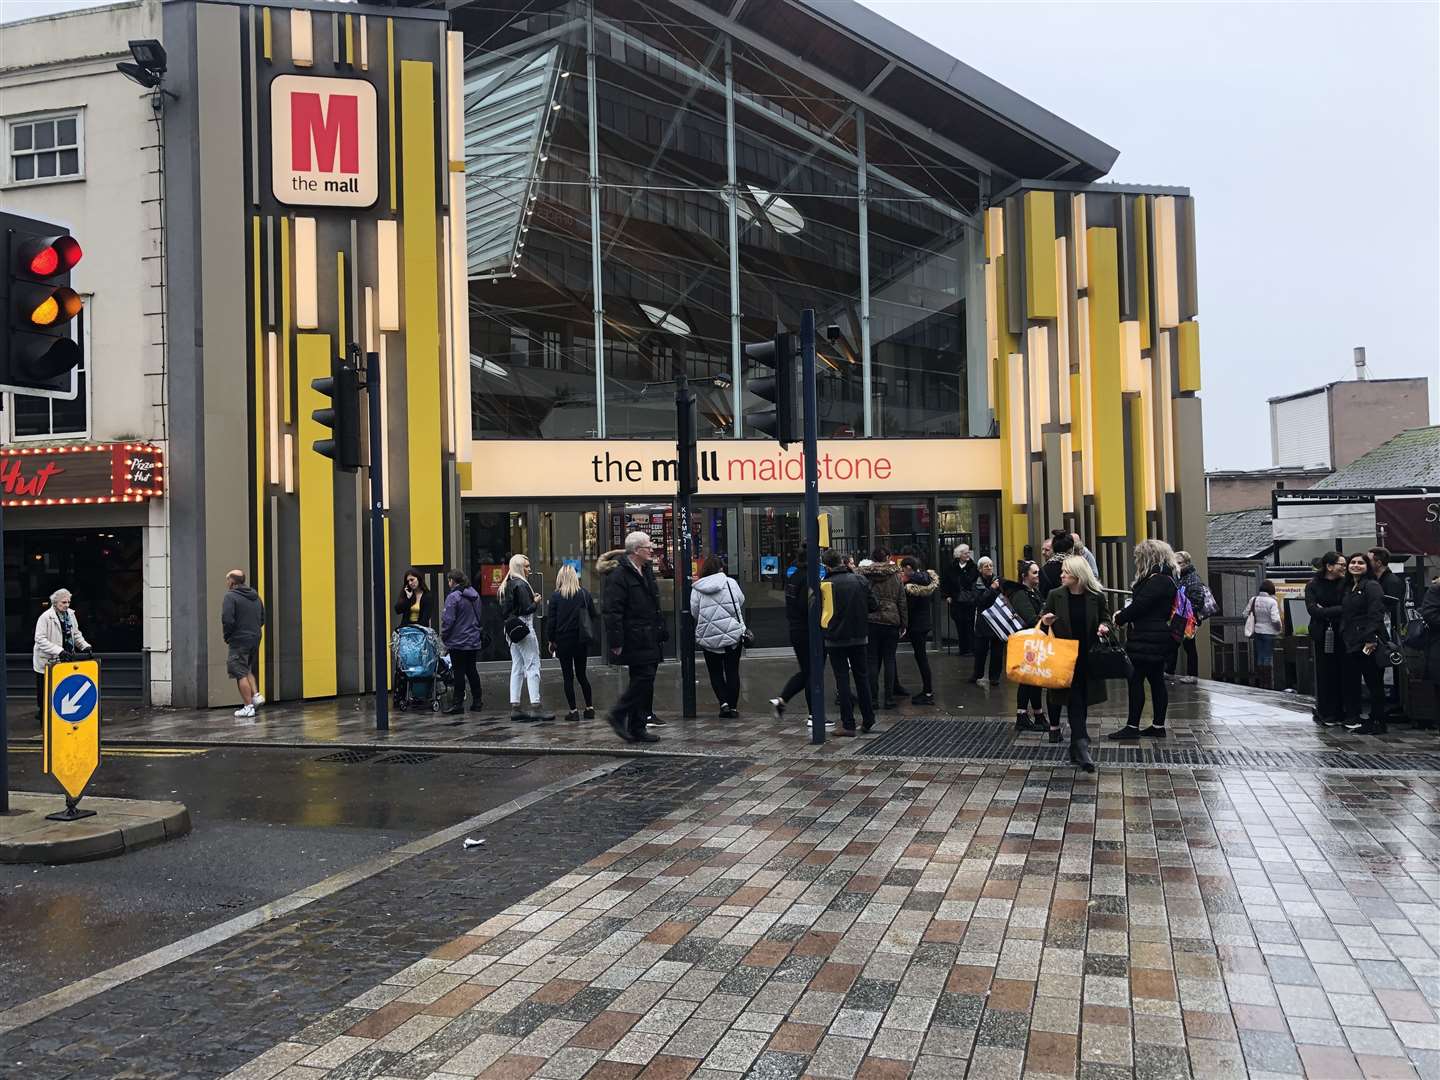 Shoppers are unable to get into the Mall in Maidstone